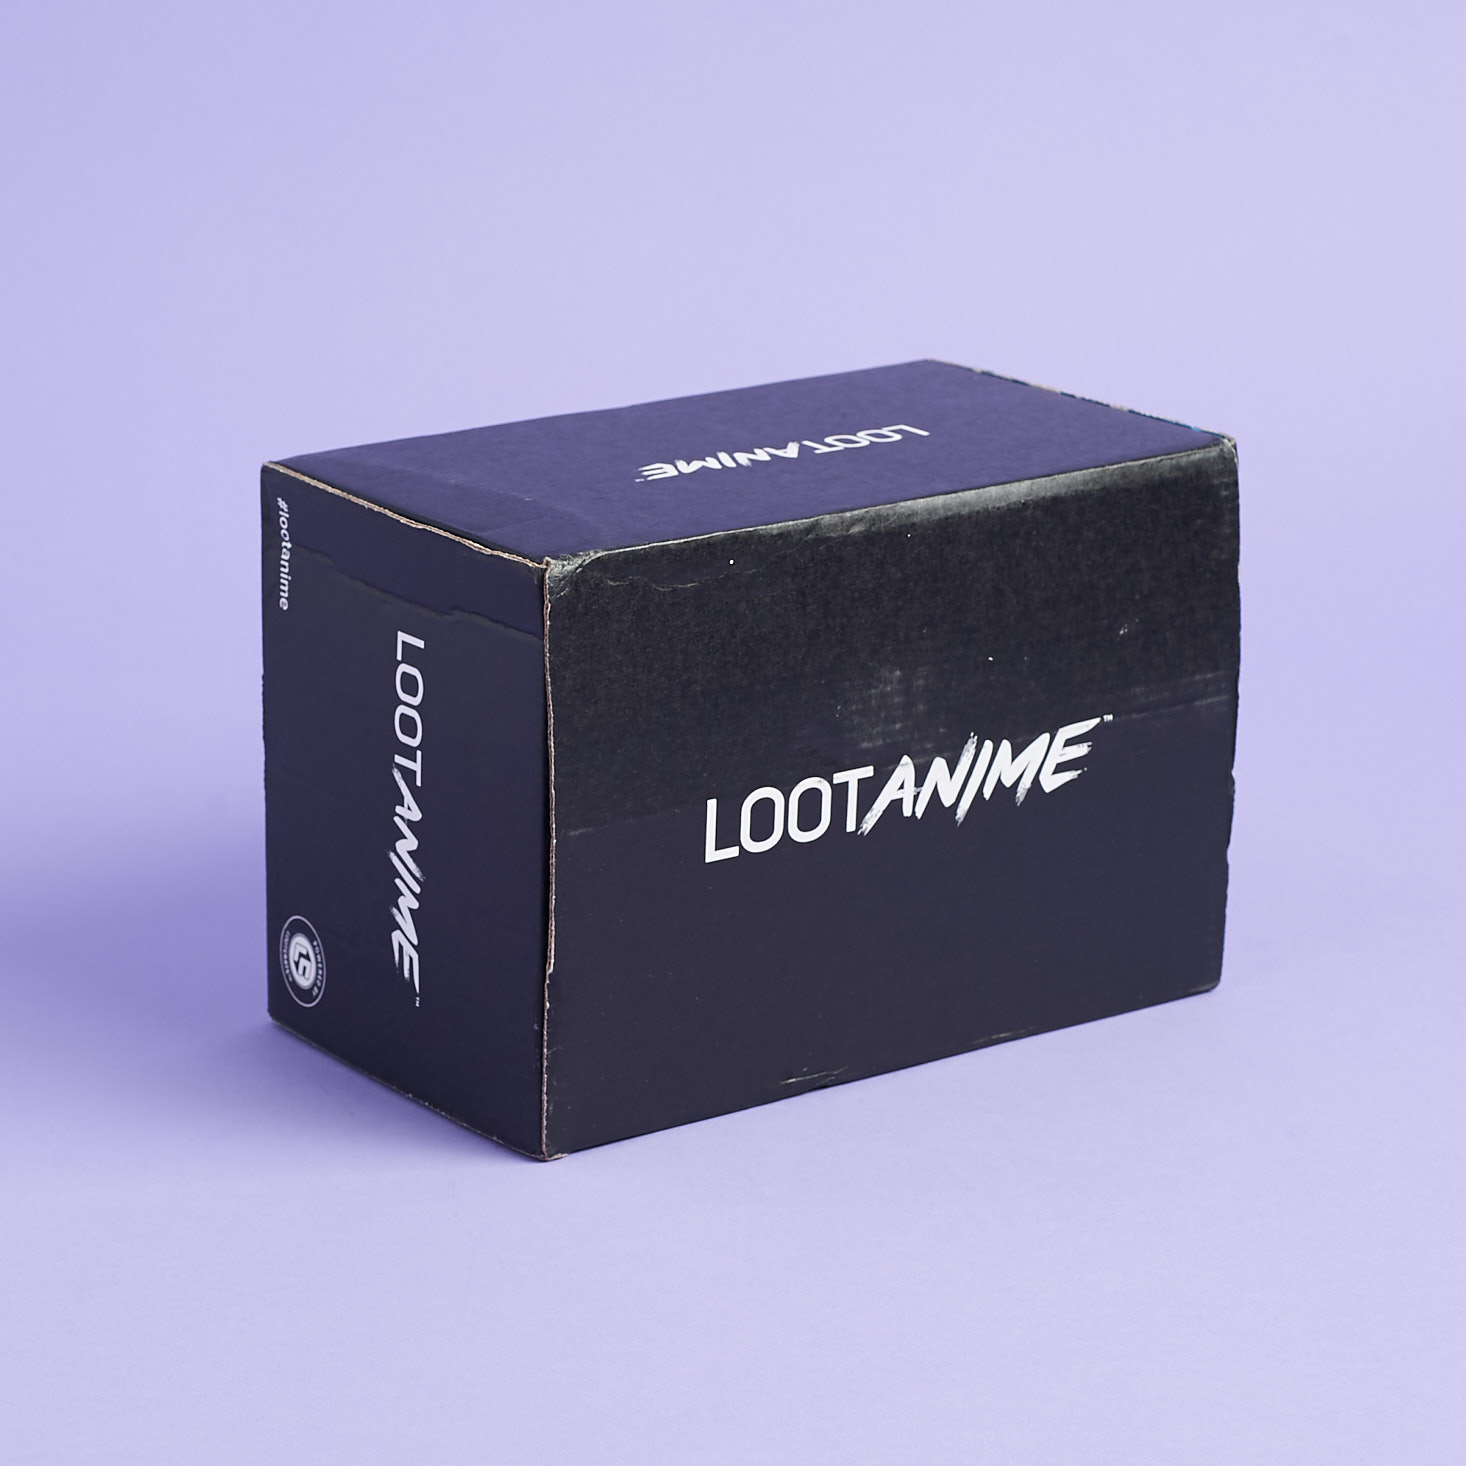 Loot Anime Subscription Box “Action” Review + Coupon – June 2018